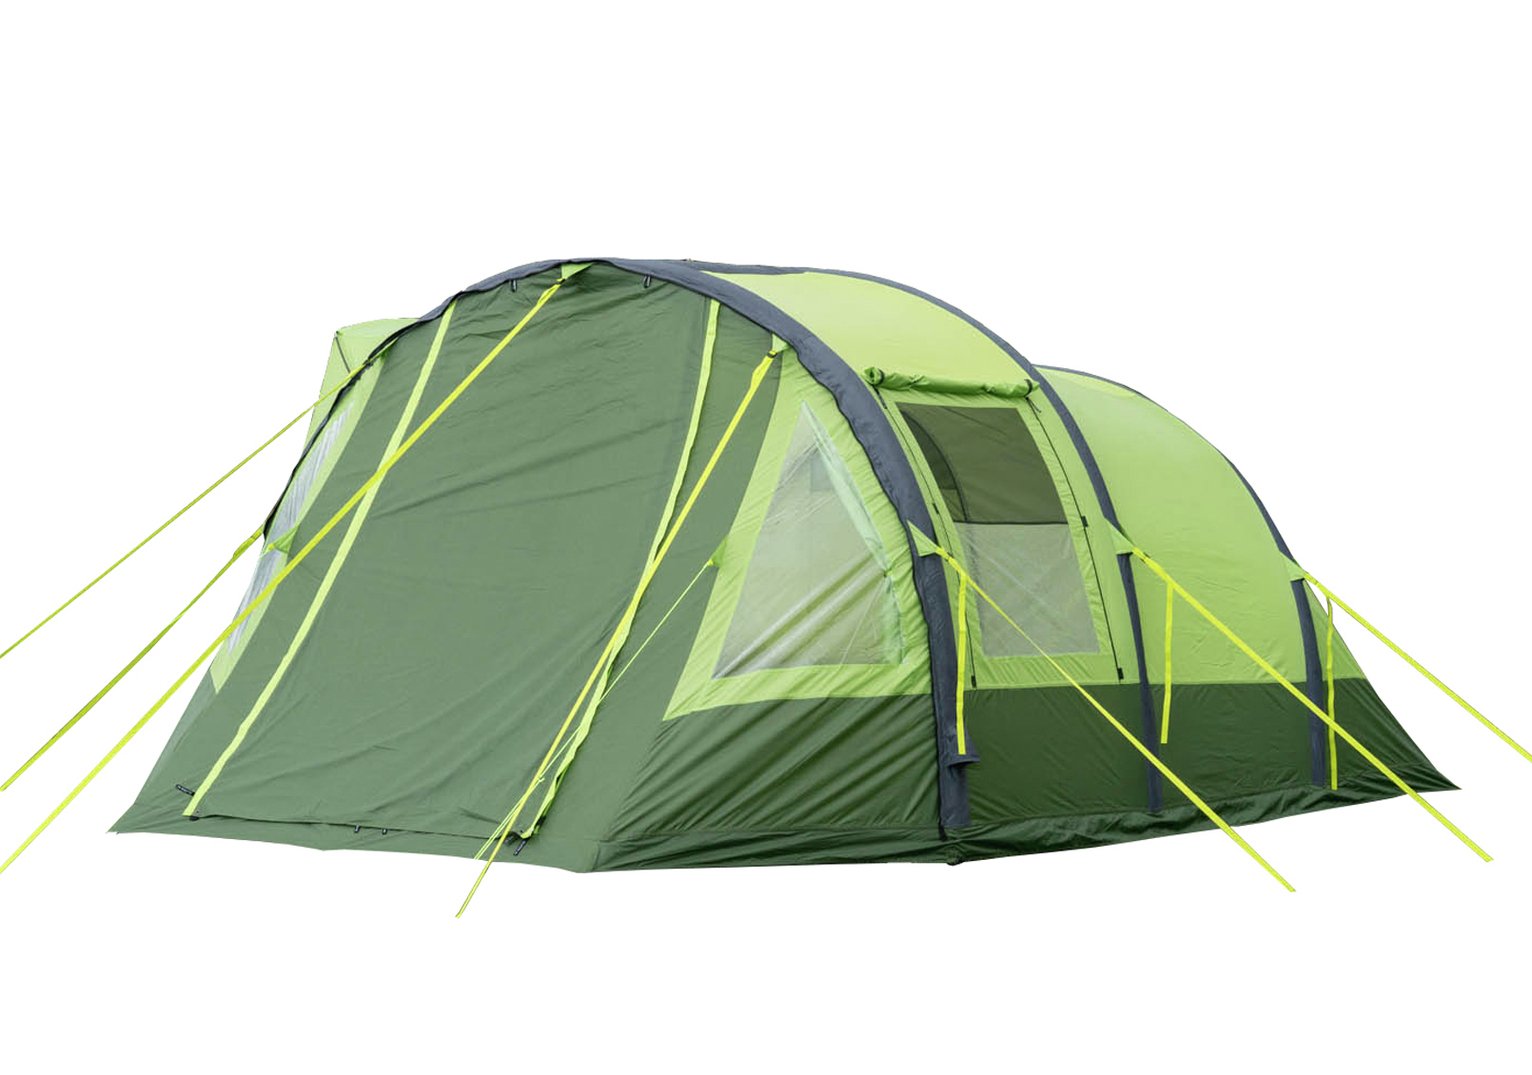 Olpro Abberley XL Breeze 4 Man 2 Room Tunnel Camping Tent